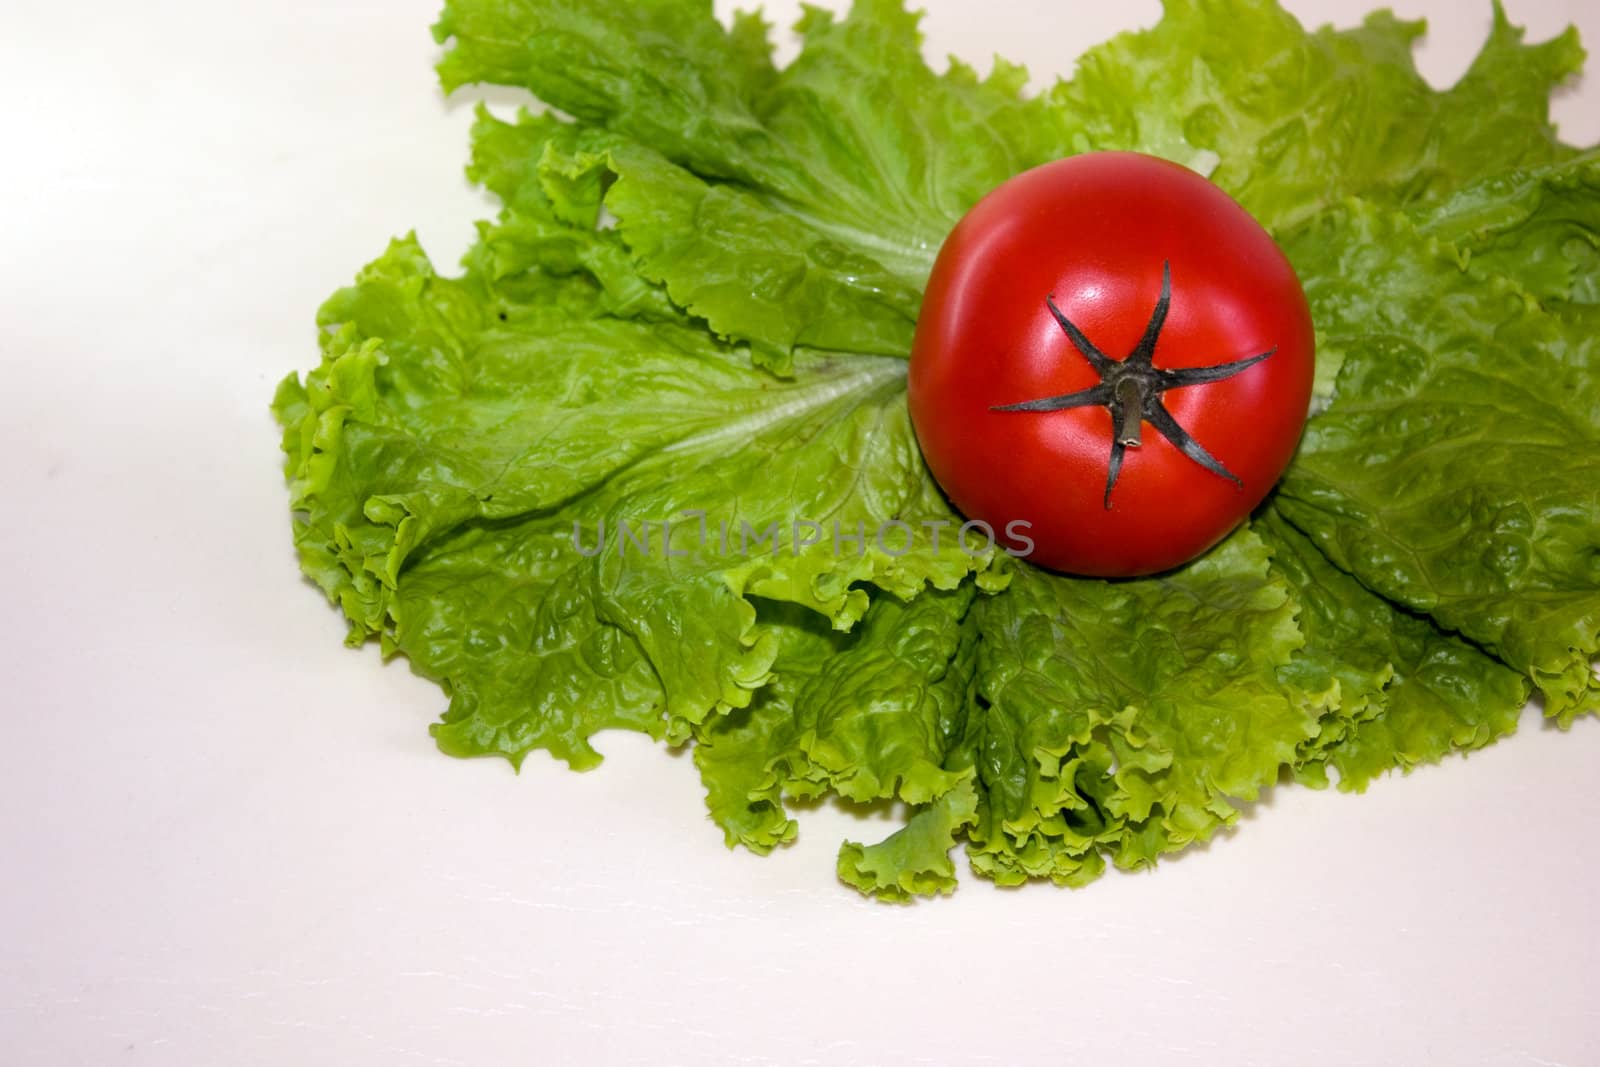 Tomato and salad leaves on a white background